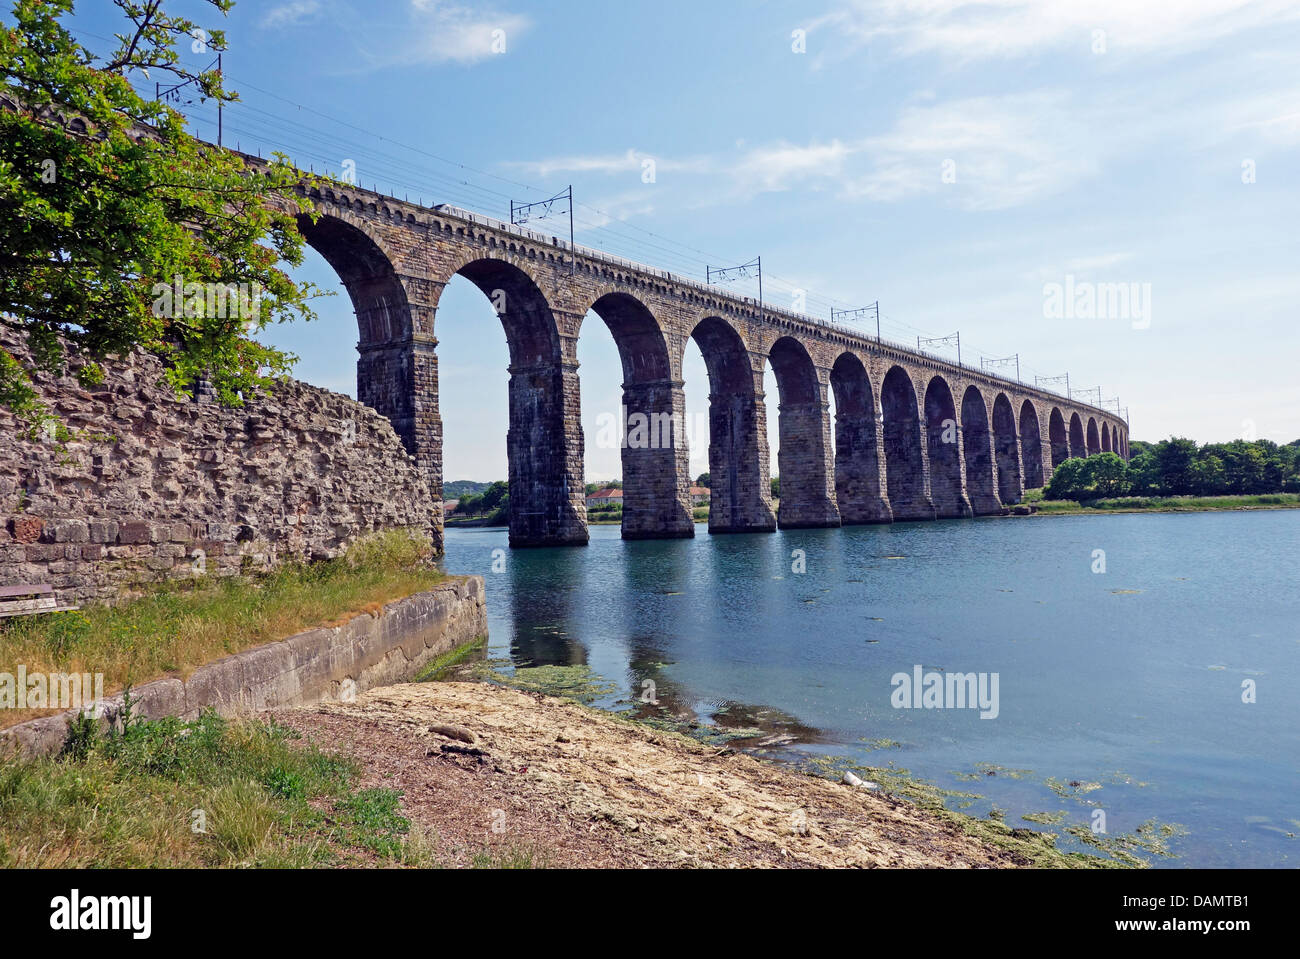 The Royal Border Bridge in Berwick -upon-Tweed England with southbound East Coast electric train passing over Stock Photo